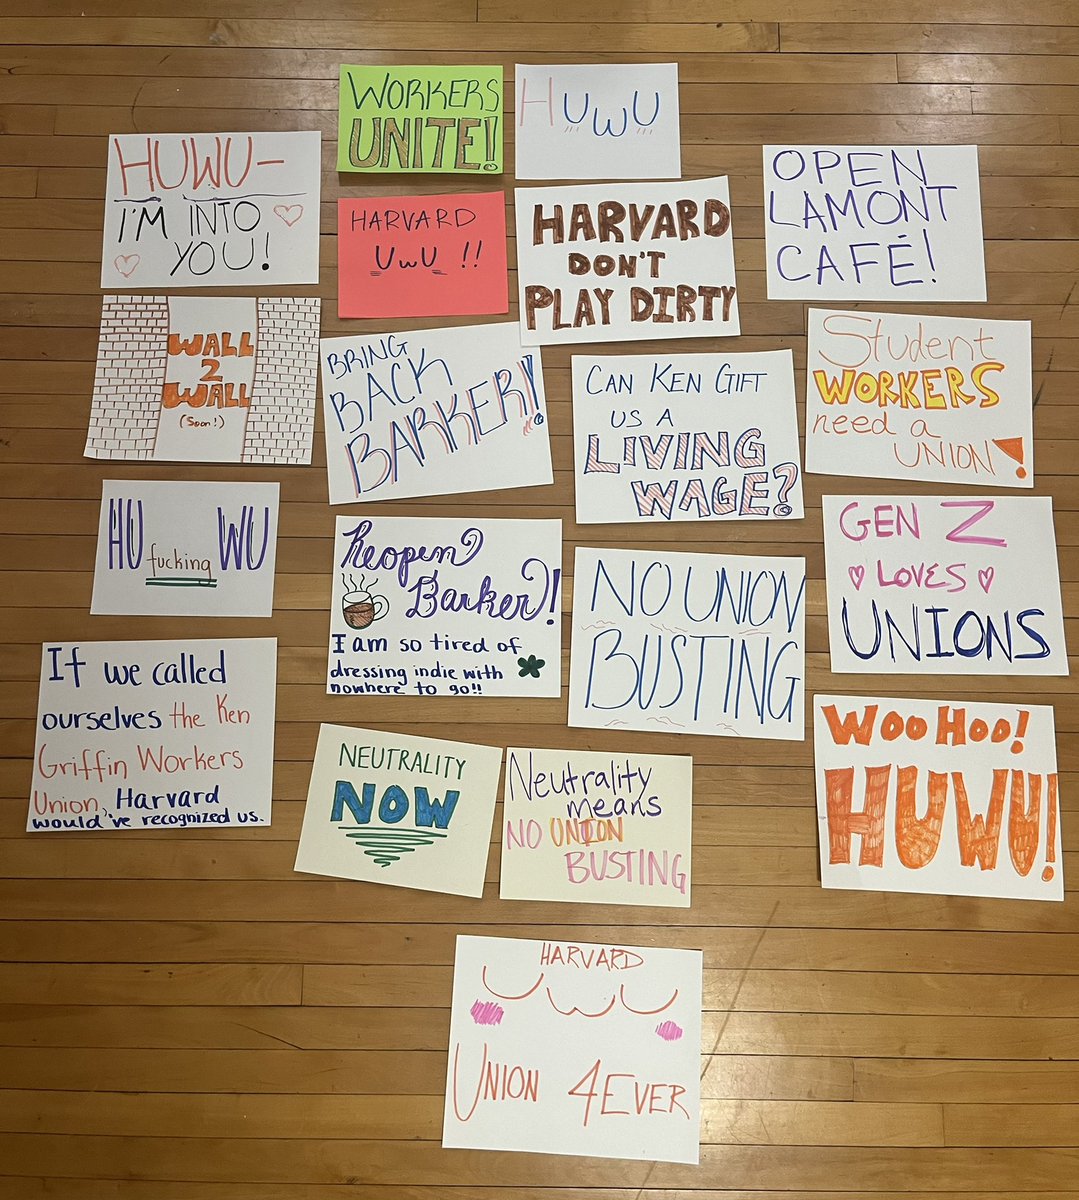 some signs we made tonight at our postermaking session - see you at the rally on friday!! 2pm at the john harvard statue in harvard yard!